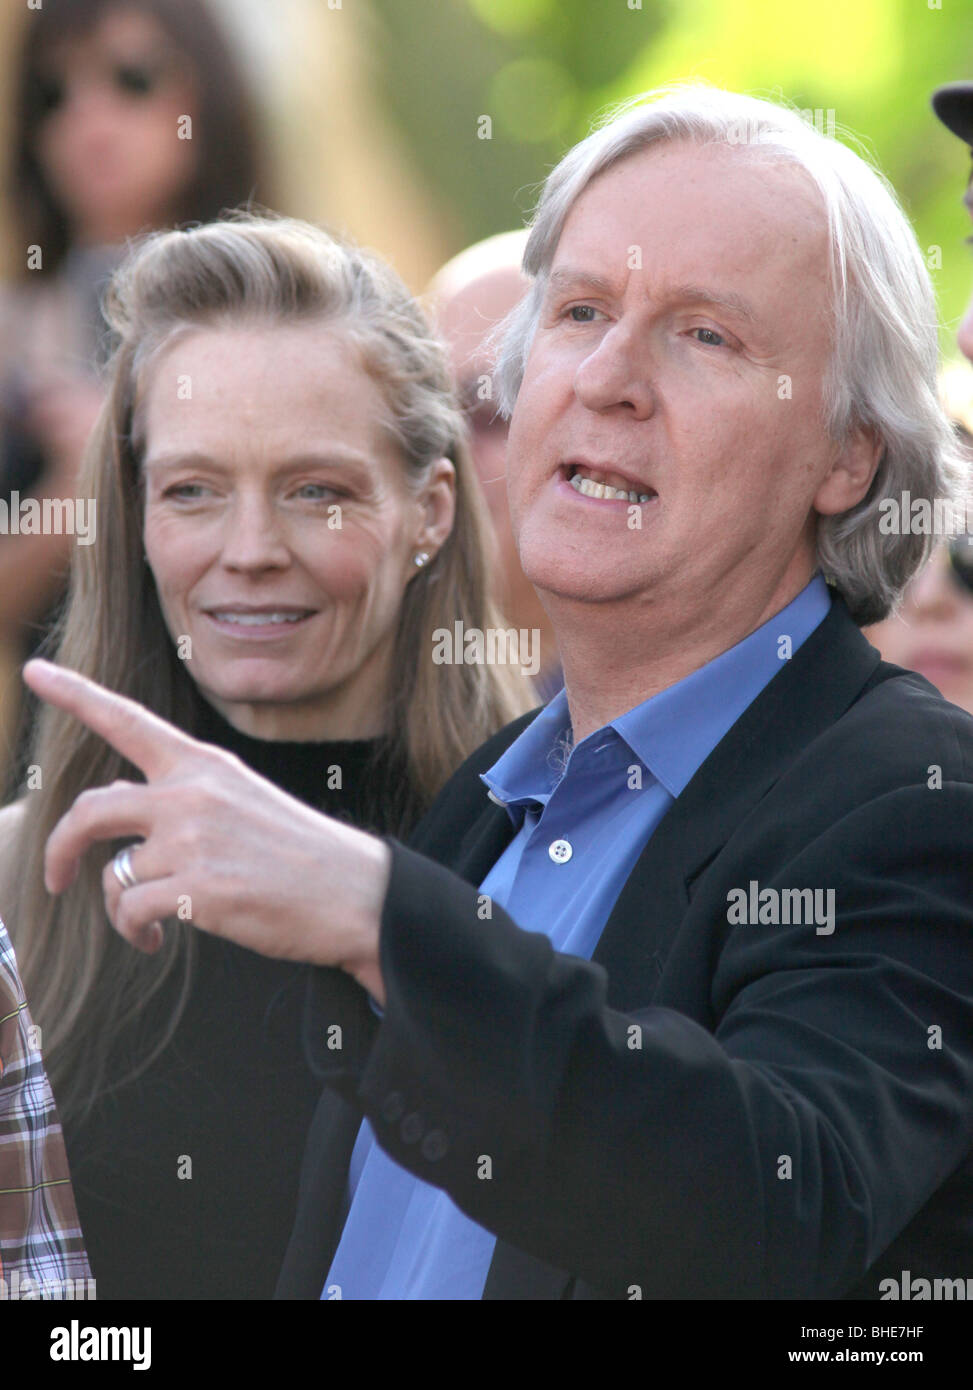 SUZY AMIS JAMES CAMERON JAMES CAMERON HONORED WITH A STAR ON THE HOLLYWOOD WALK OF FAME HOLLYWOOD LOS ANGELES CA USA 18 Dece Stock Photo